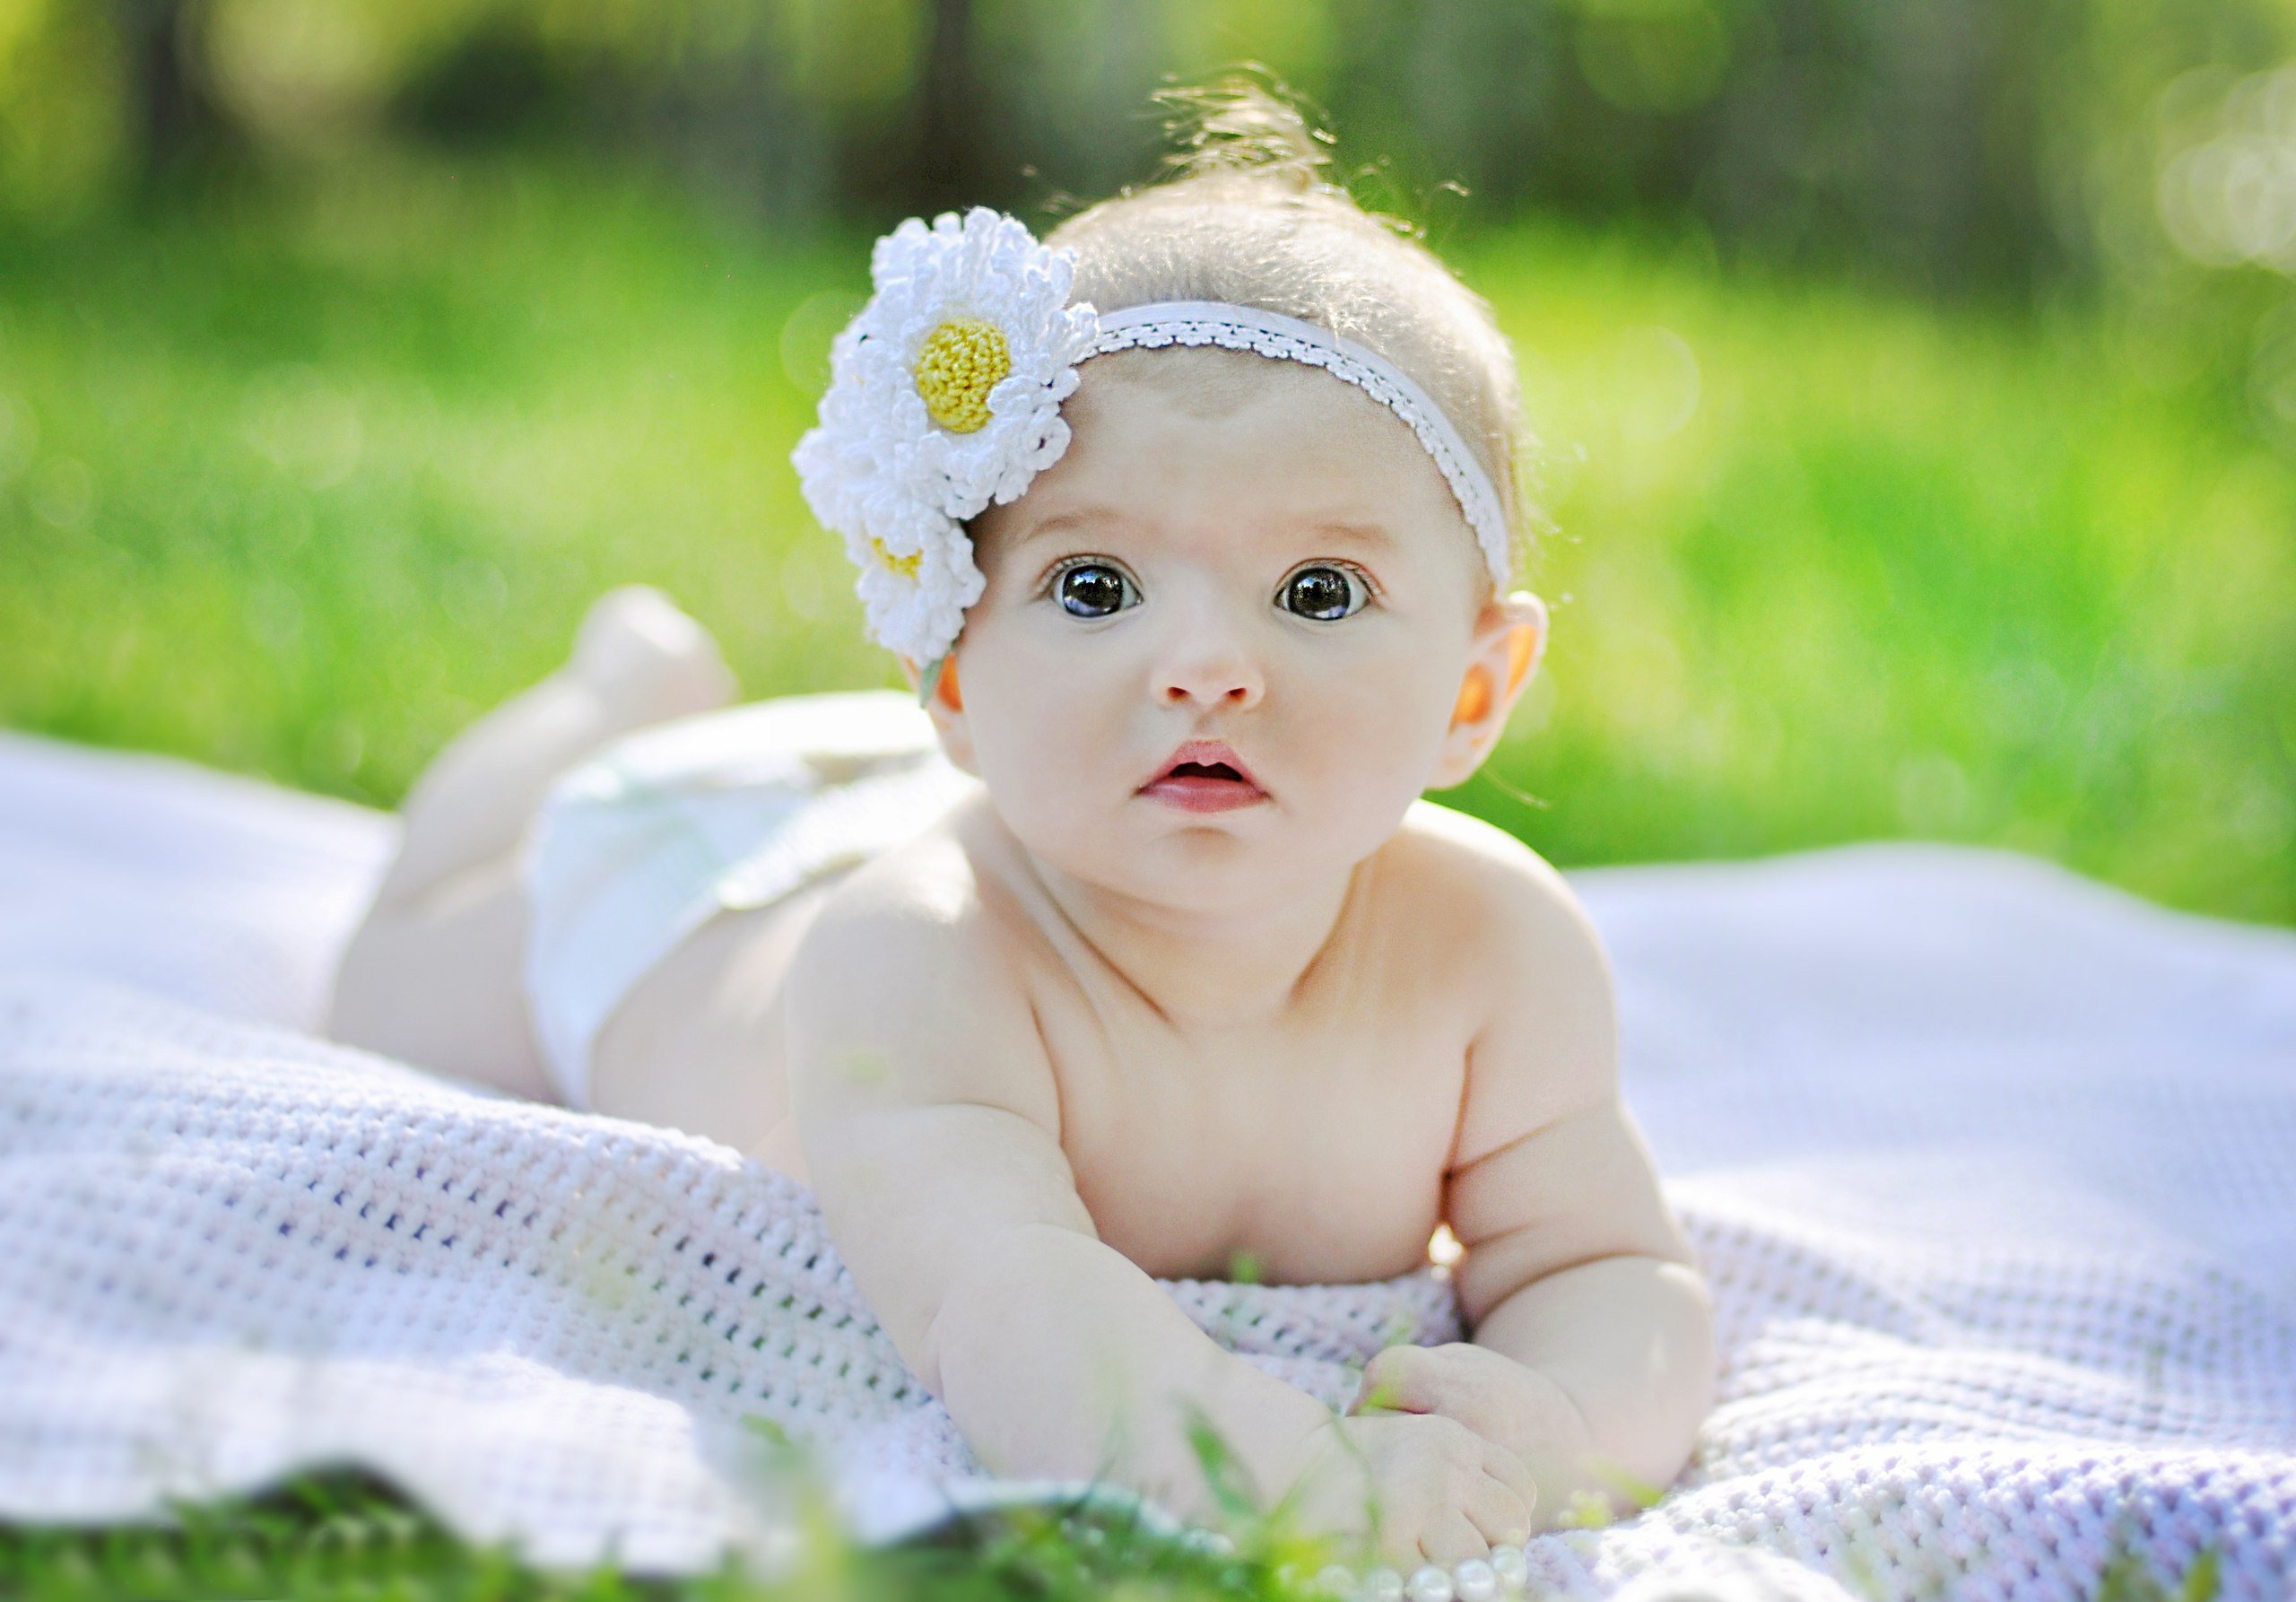 Cute Baby Images Download For Mobile - 2560x1786 Wallpaper 